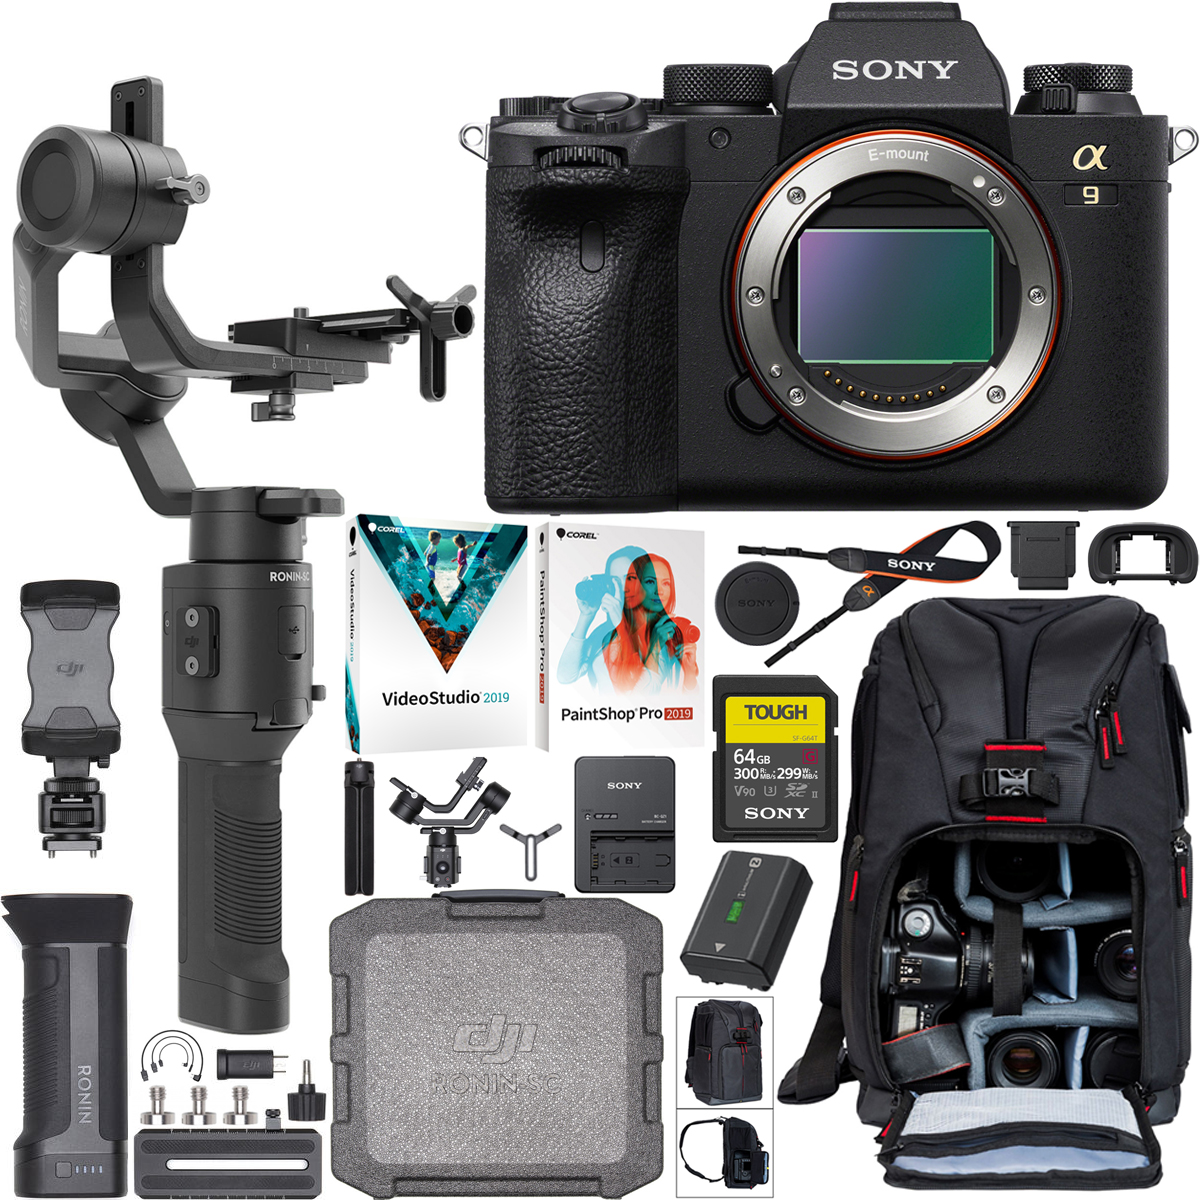  Sony a7 IV Full Frame Mirrorless Camera Body with 2 Lens Kit  FE 50mm F1.8 + 28-70mm F3.5-5.6 ILCE-7M4K/B + SEL50F18F Bundle w/Deco Gear  Backpack + Monopod +Extra Battery, LED